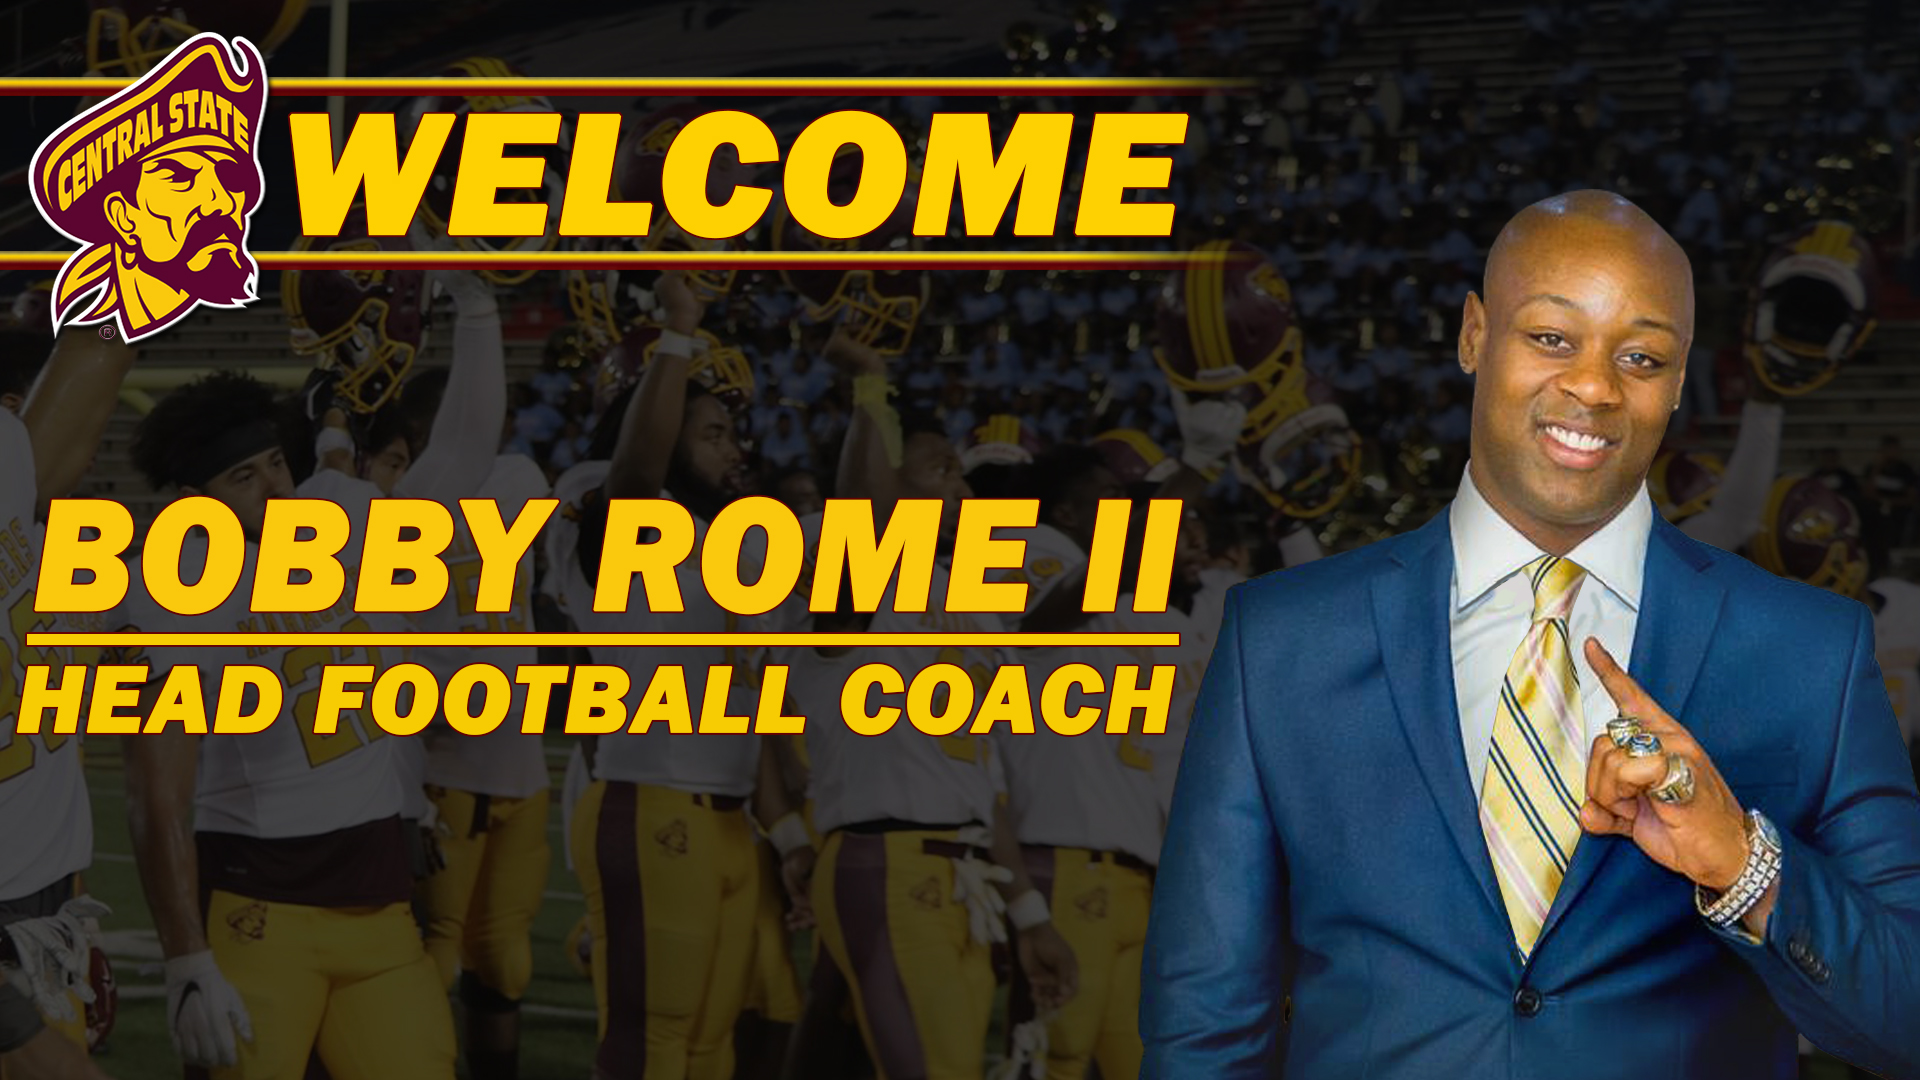 Coach_Rome_Welcome_Graphic